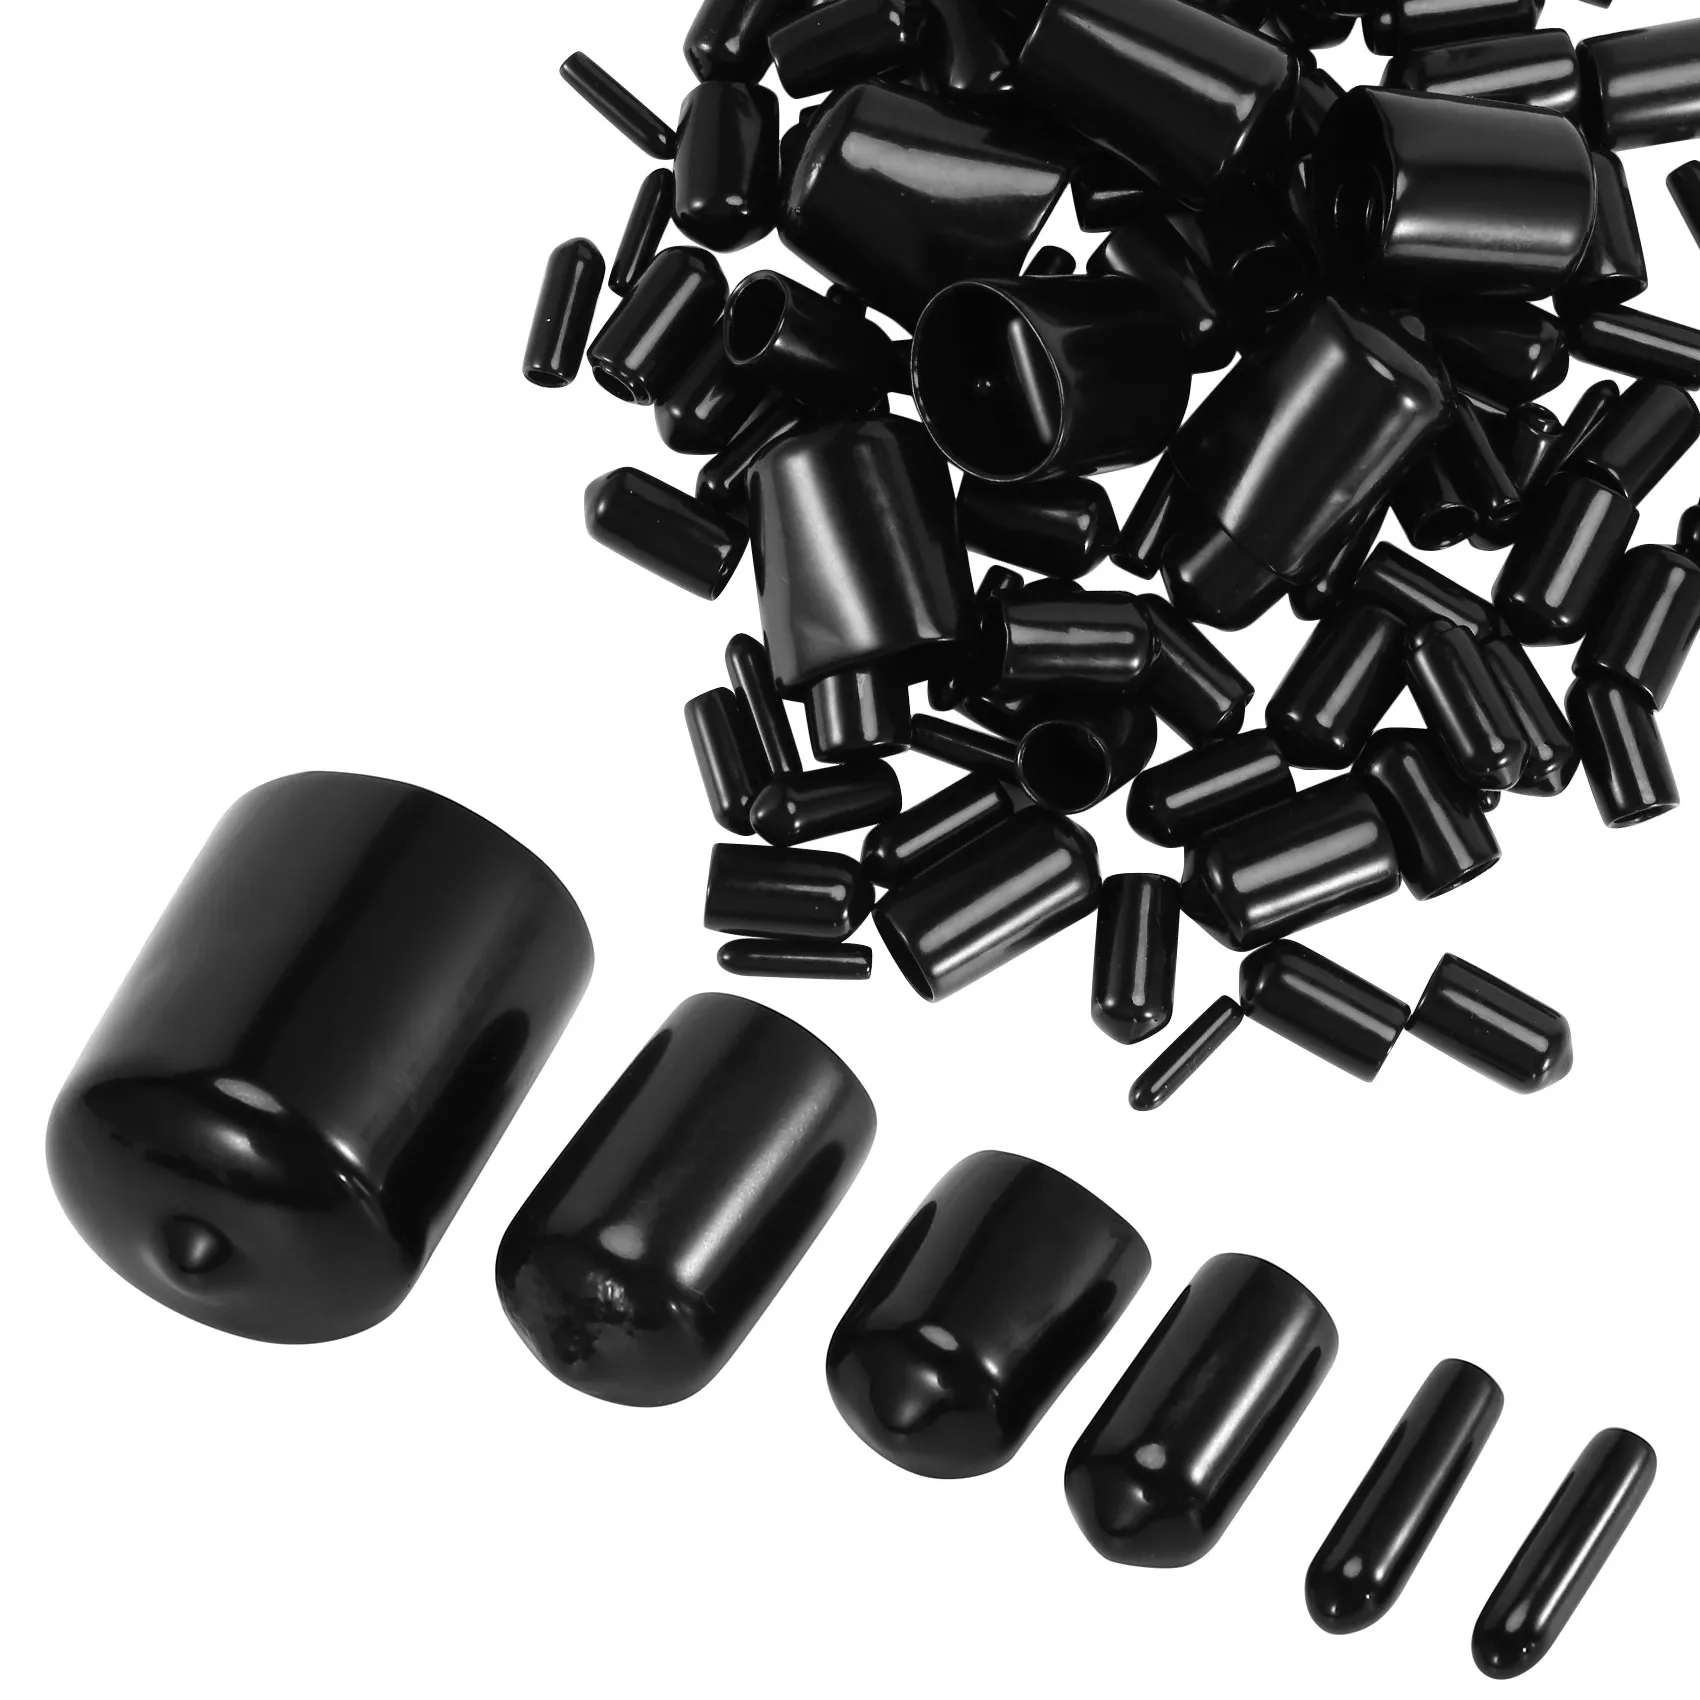 

156 Pieces of Vinyl Elastic End Cap Bolts Screws Rubber Thread Protection Safety Caps 9 Sizes 2/25 to 4/5 Inches (Black)